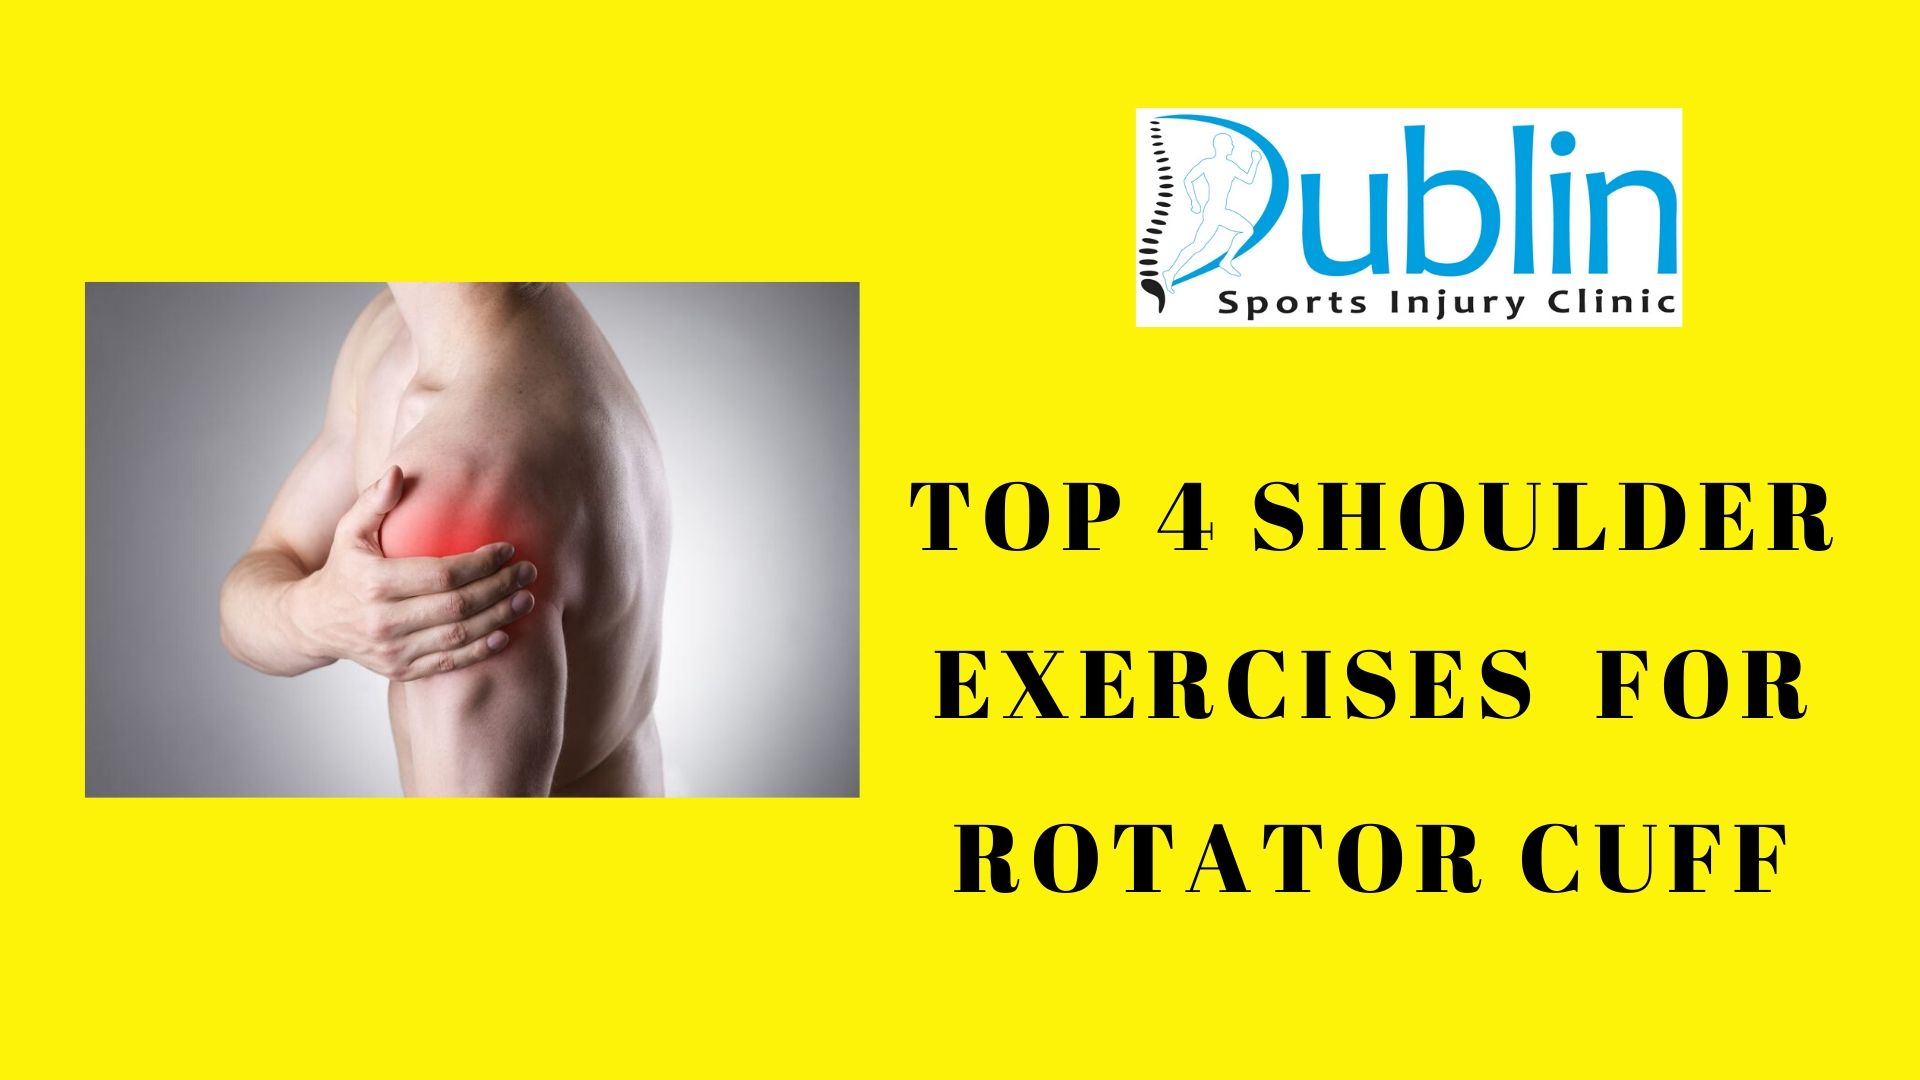 top-4-shoulder-exercises-for-rotator-cuff-injury-dublin-sports-injury